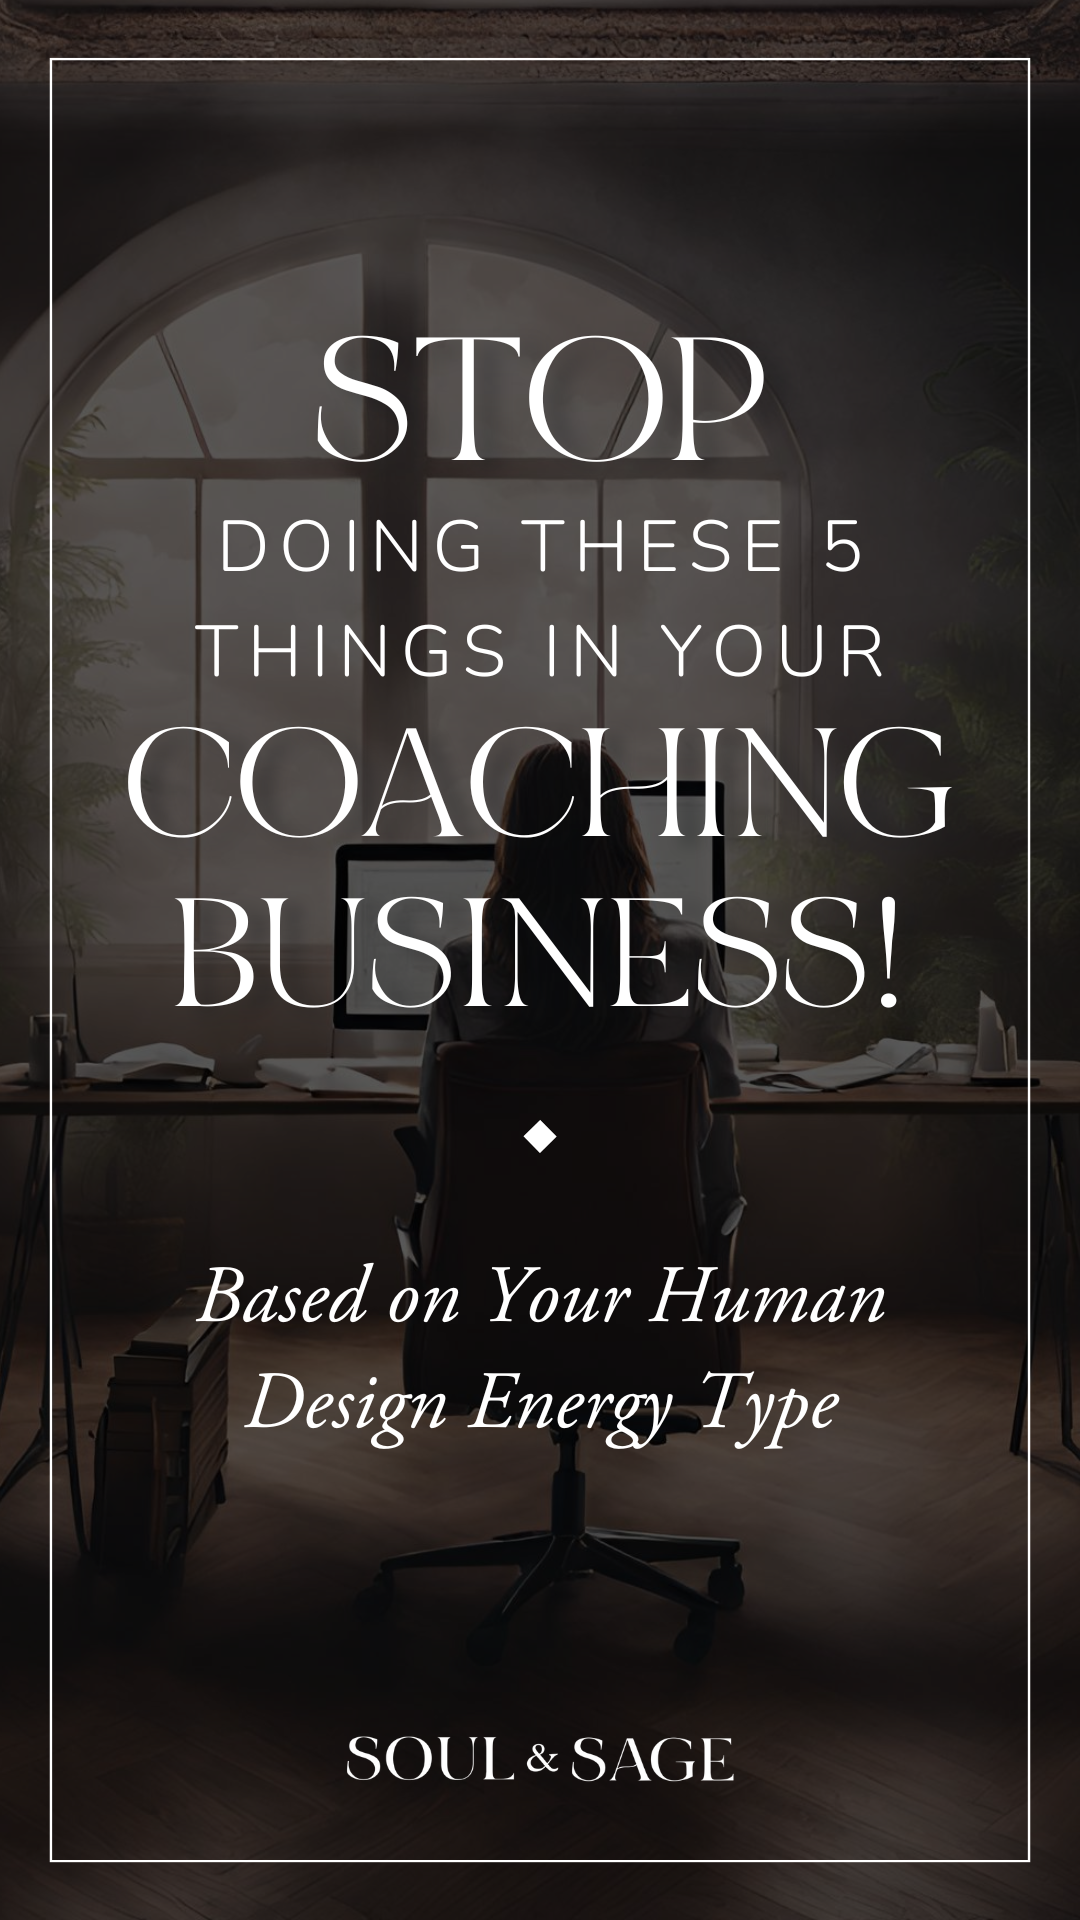 STOP!! Doing these 5 things in your coaching business — based on your Human Design Energy Type | Human Design for Coaches by Soul & Sage